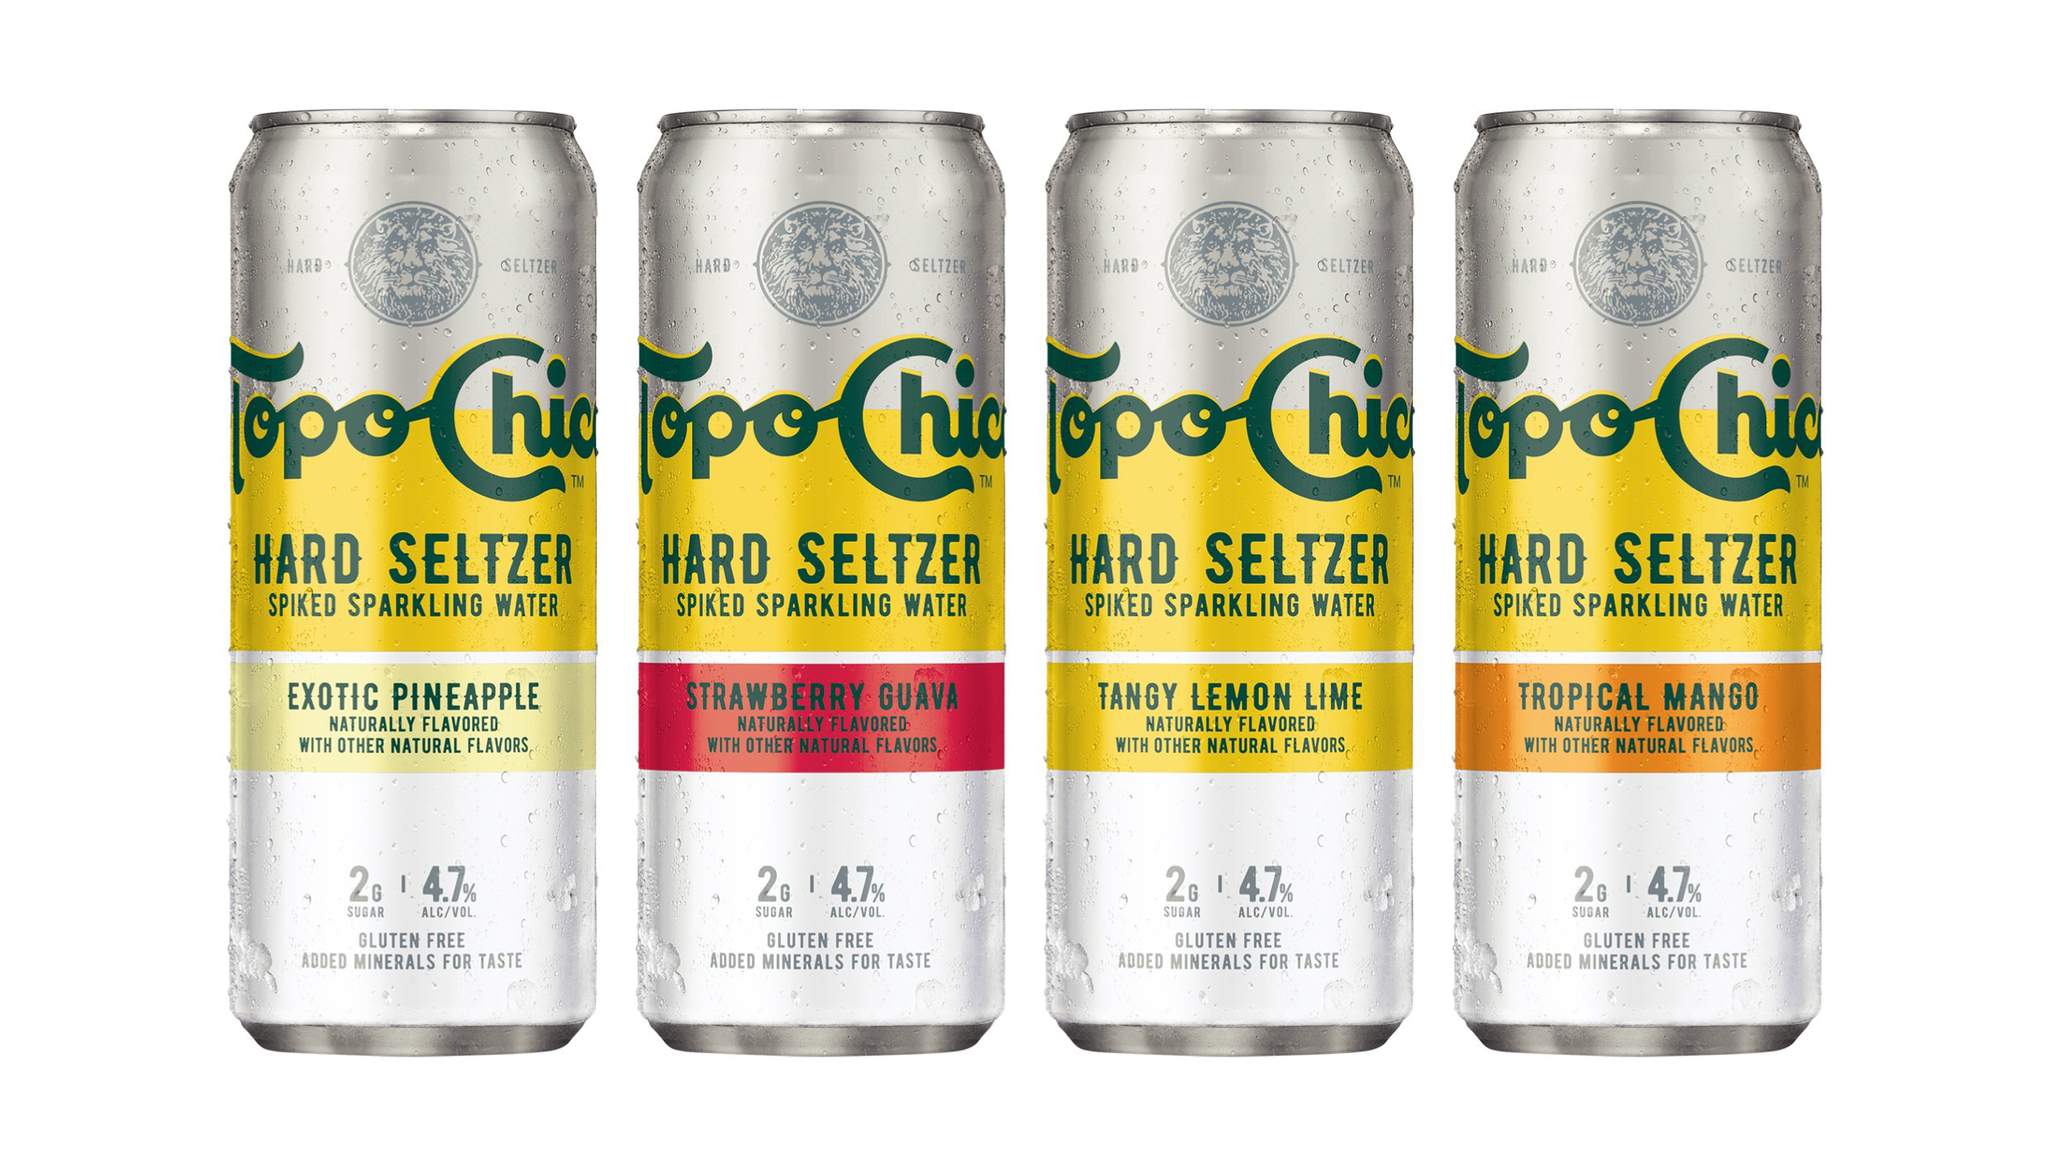 Get your coolers ready: Topo Chico Hard Seltzer coming to Texas later this month